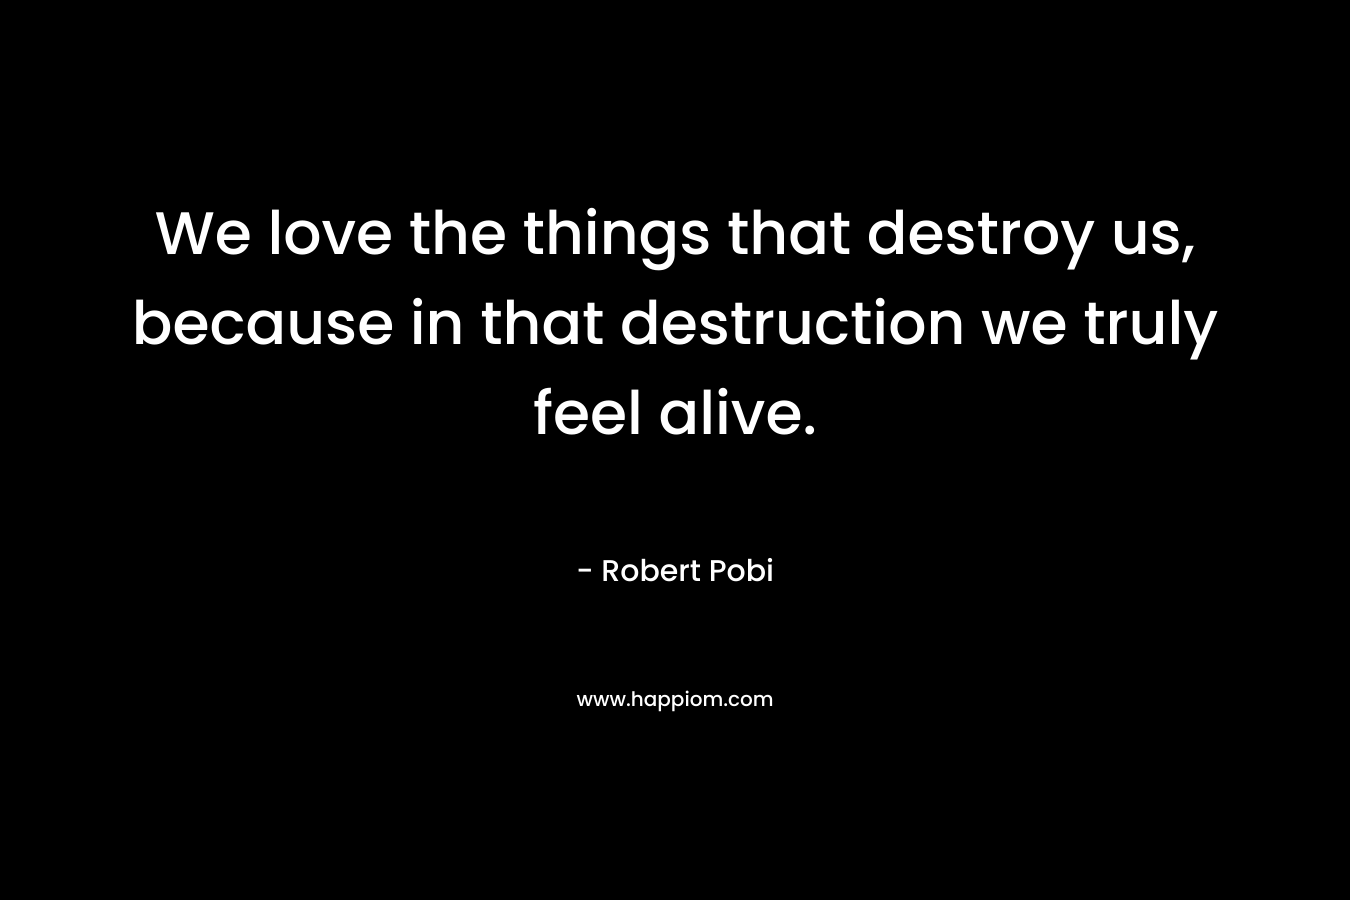 We love the things that destroy us, because in that destruction we truly feel alive. – Robert Pobi